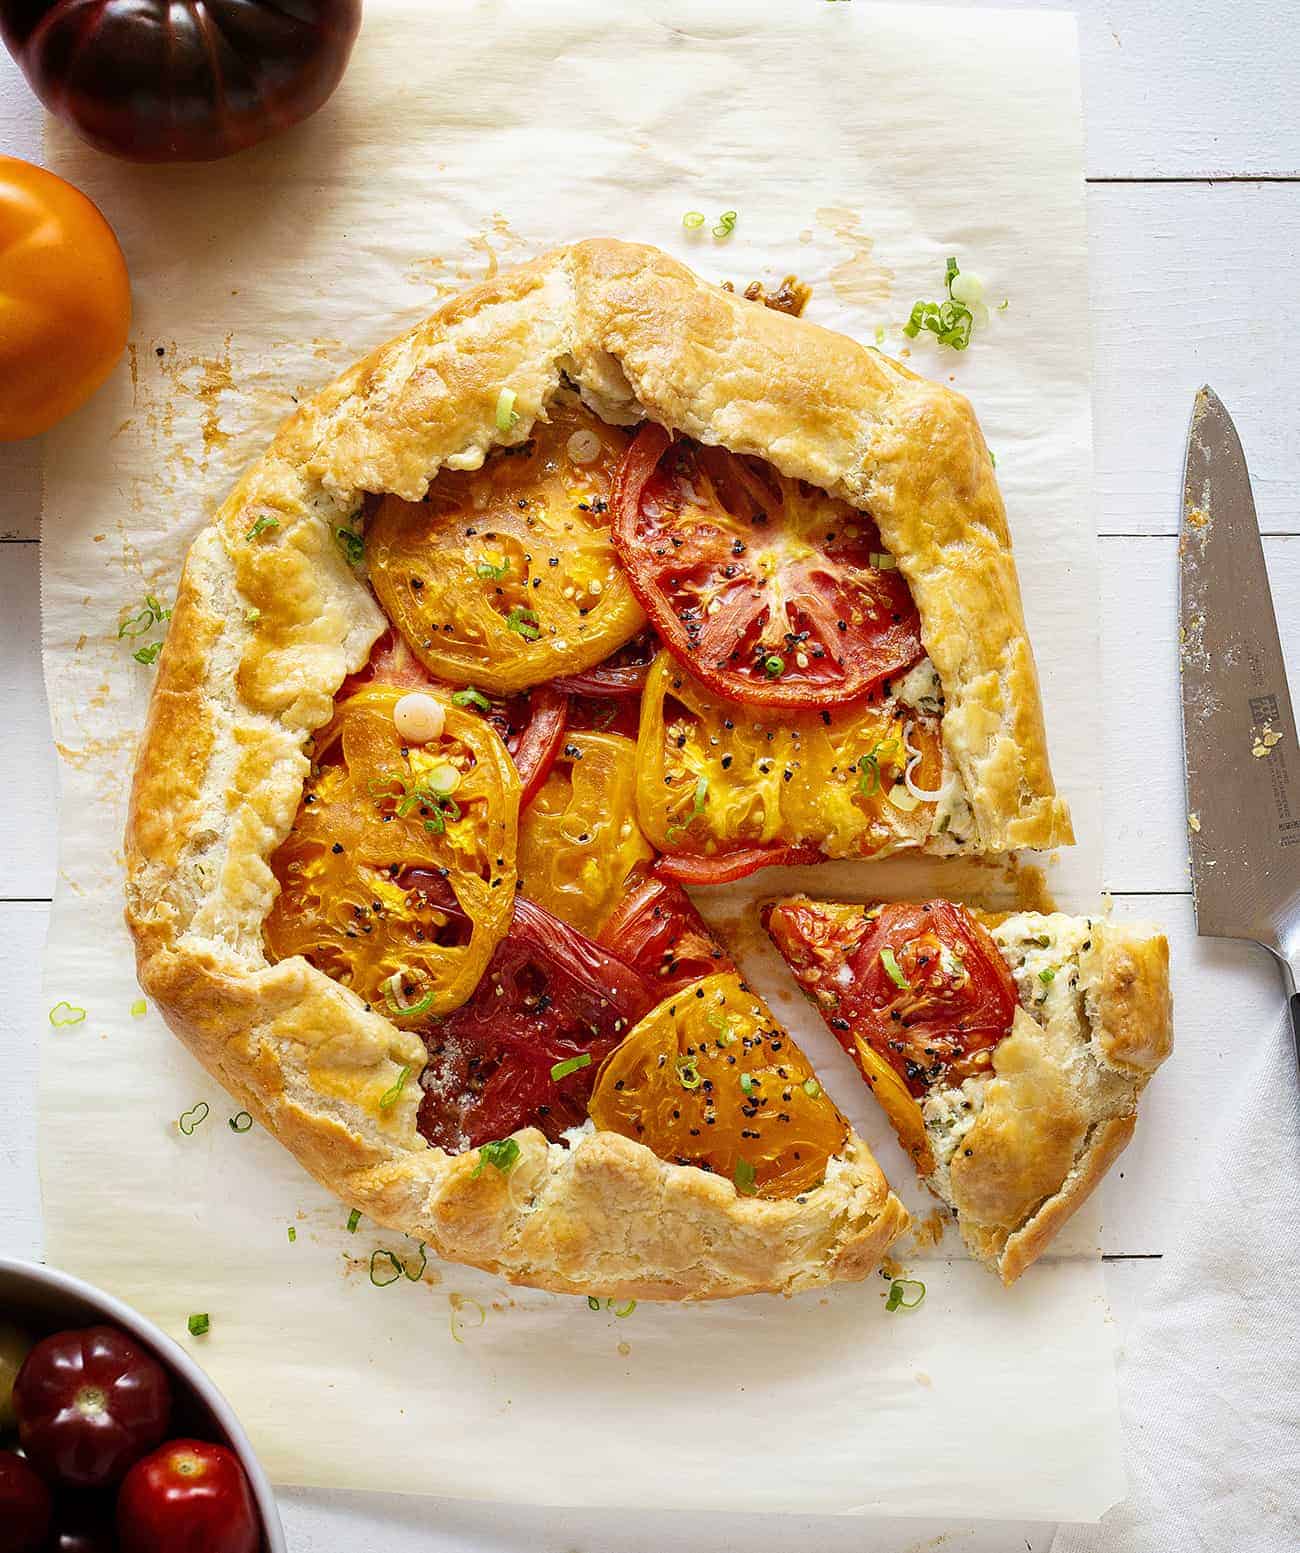 Piece cut out of a Baked Tomato Galette.